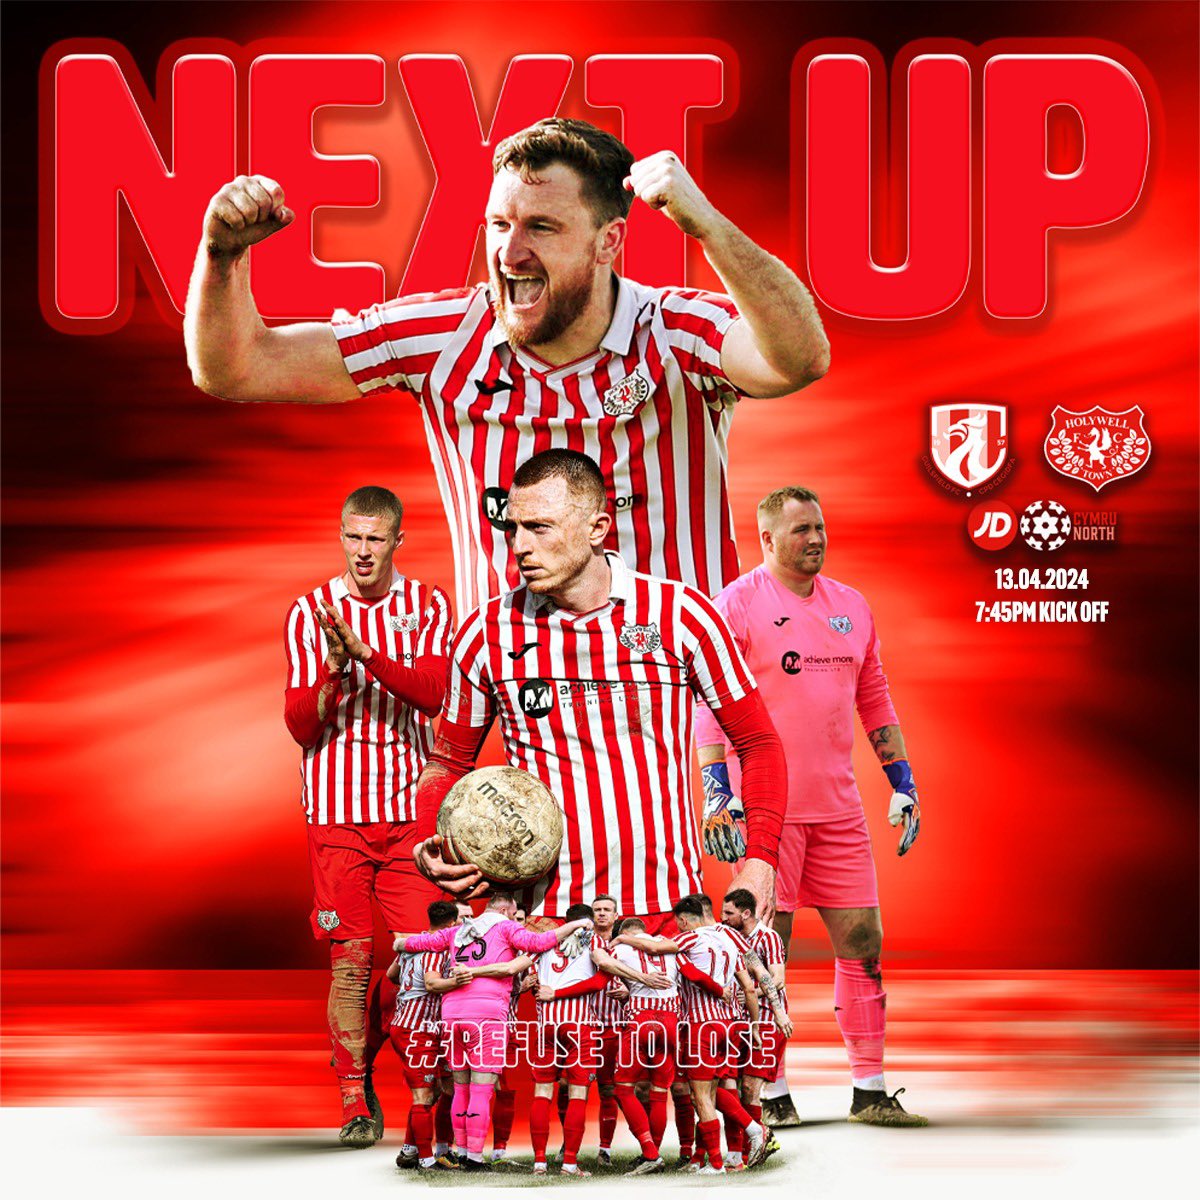 Next up: The Wellmen face @GUILS1957 on Saturday evening after Tuesdays postponement. Please note this match will be played at Newtown FC and kick off will be 7.45pm Let’s turn out in force to cheer the Wellmen on to 3 more points See you there ……. #Wellmen 🔴⚪️🔴